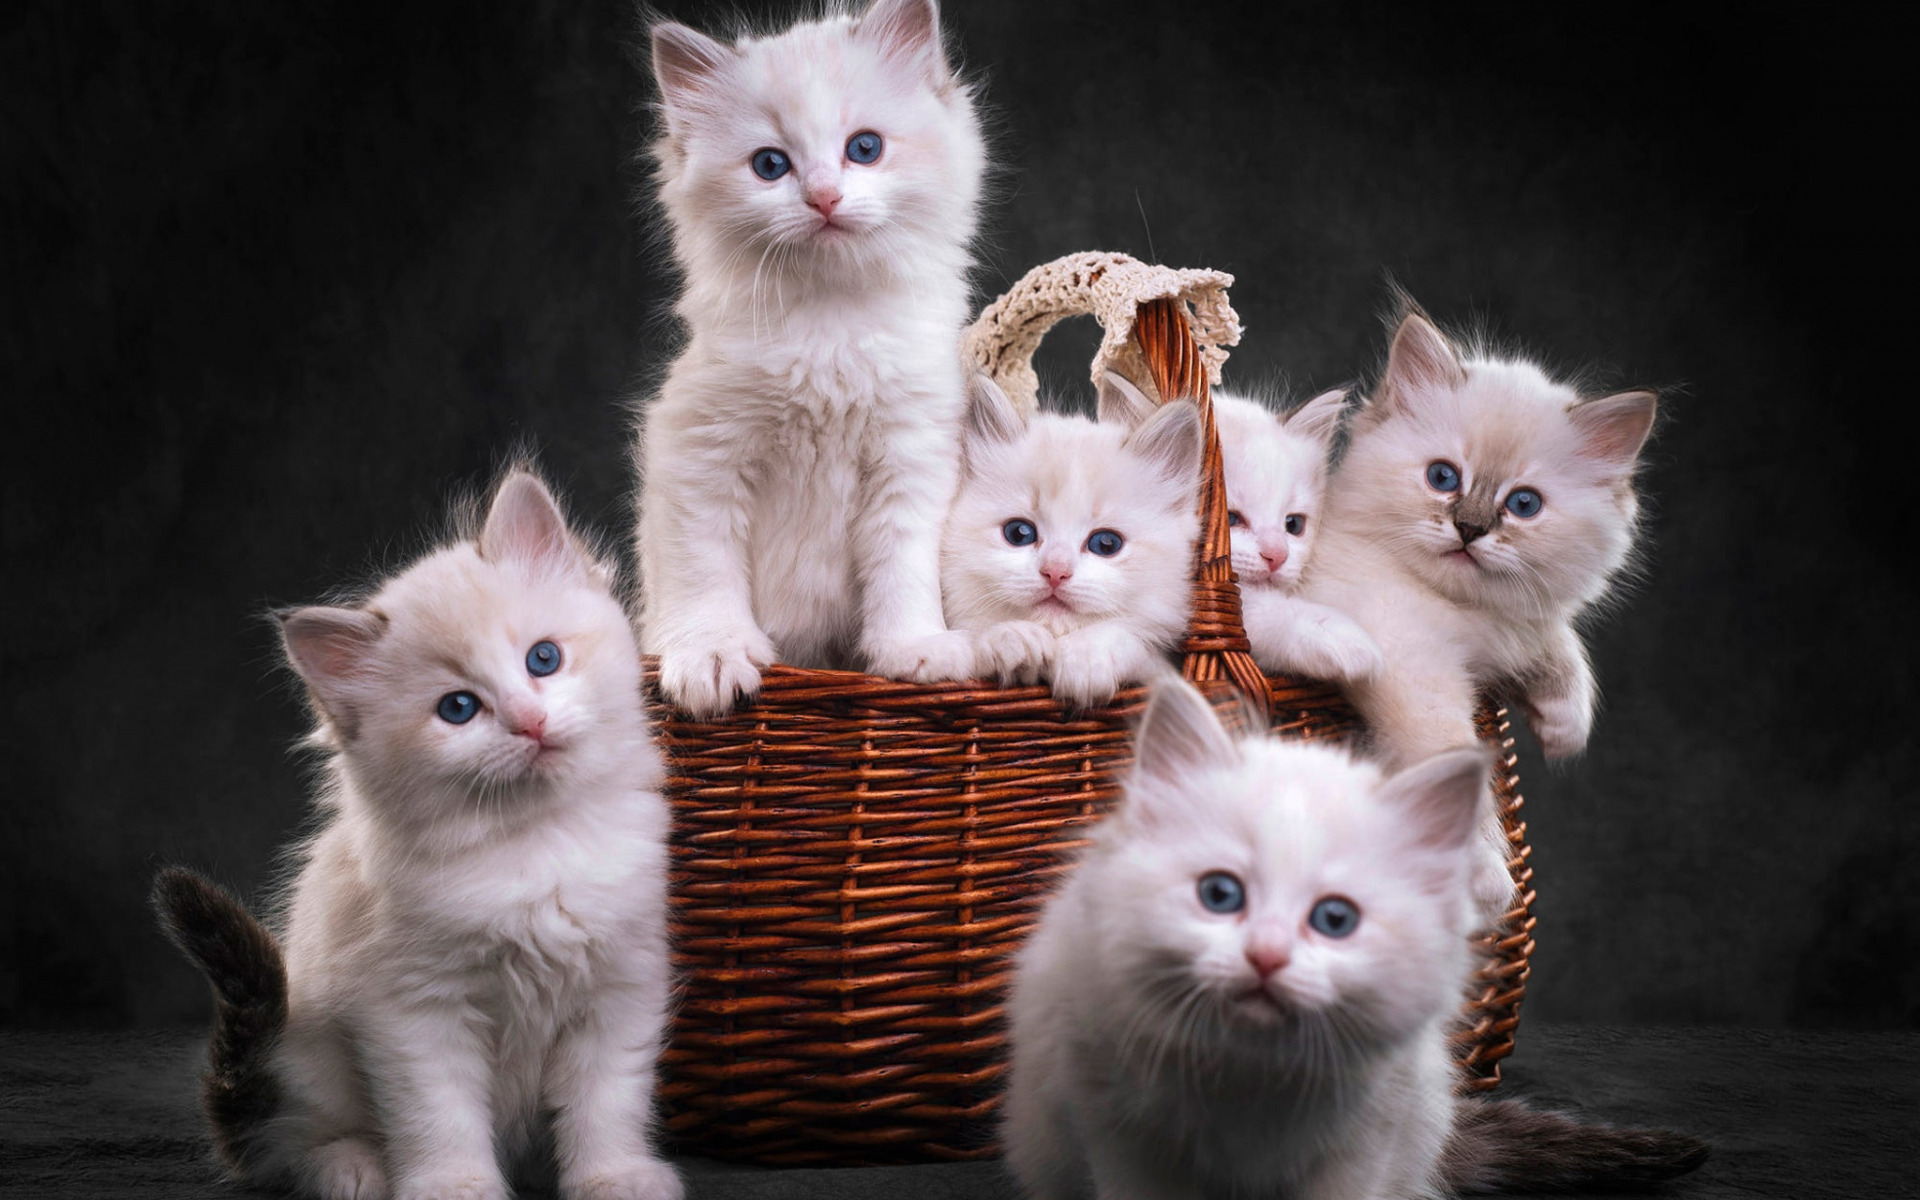 Download wallpaper ragdoll, small kittens, cat family, cute fluffy white kittens, little cats for desktop with resolution 1920x1200. High Quality HD picture wallpaper